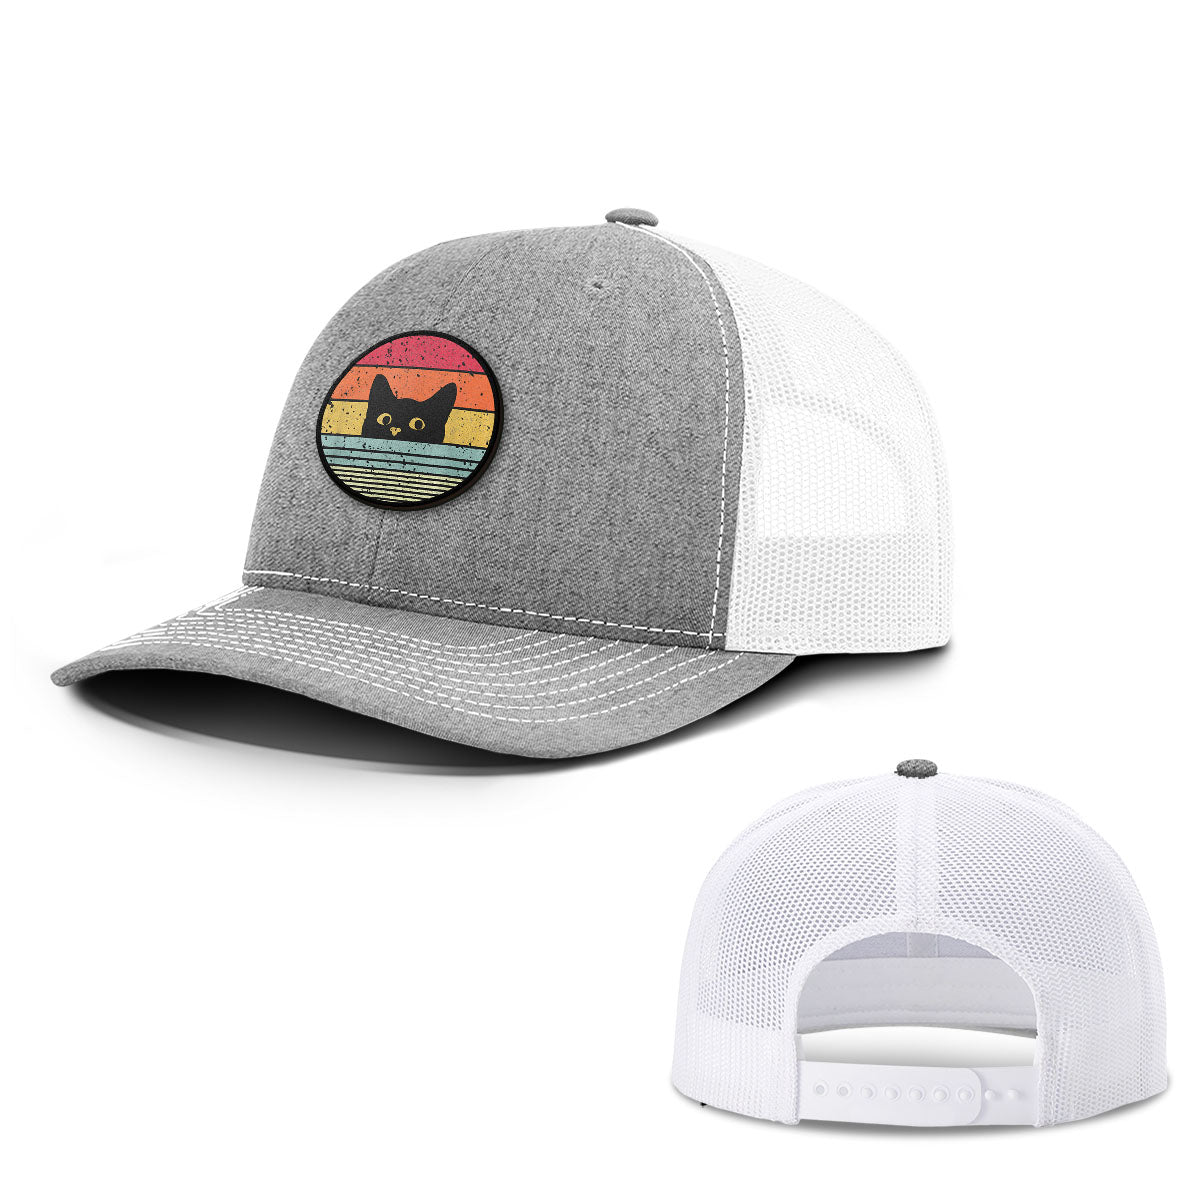 Retro Cat Patch Hats - BustedTees.com